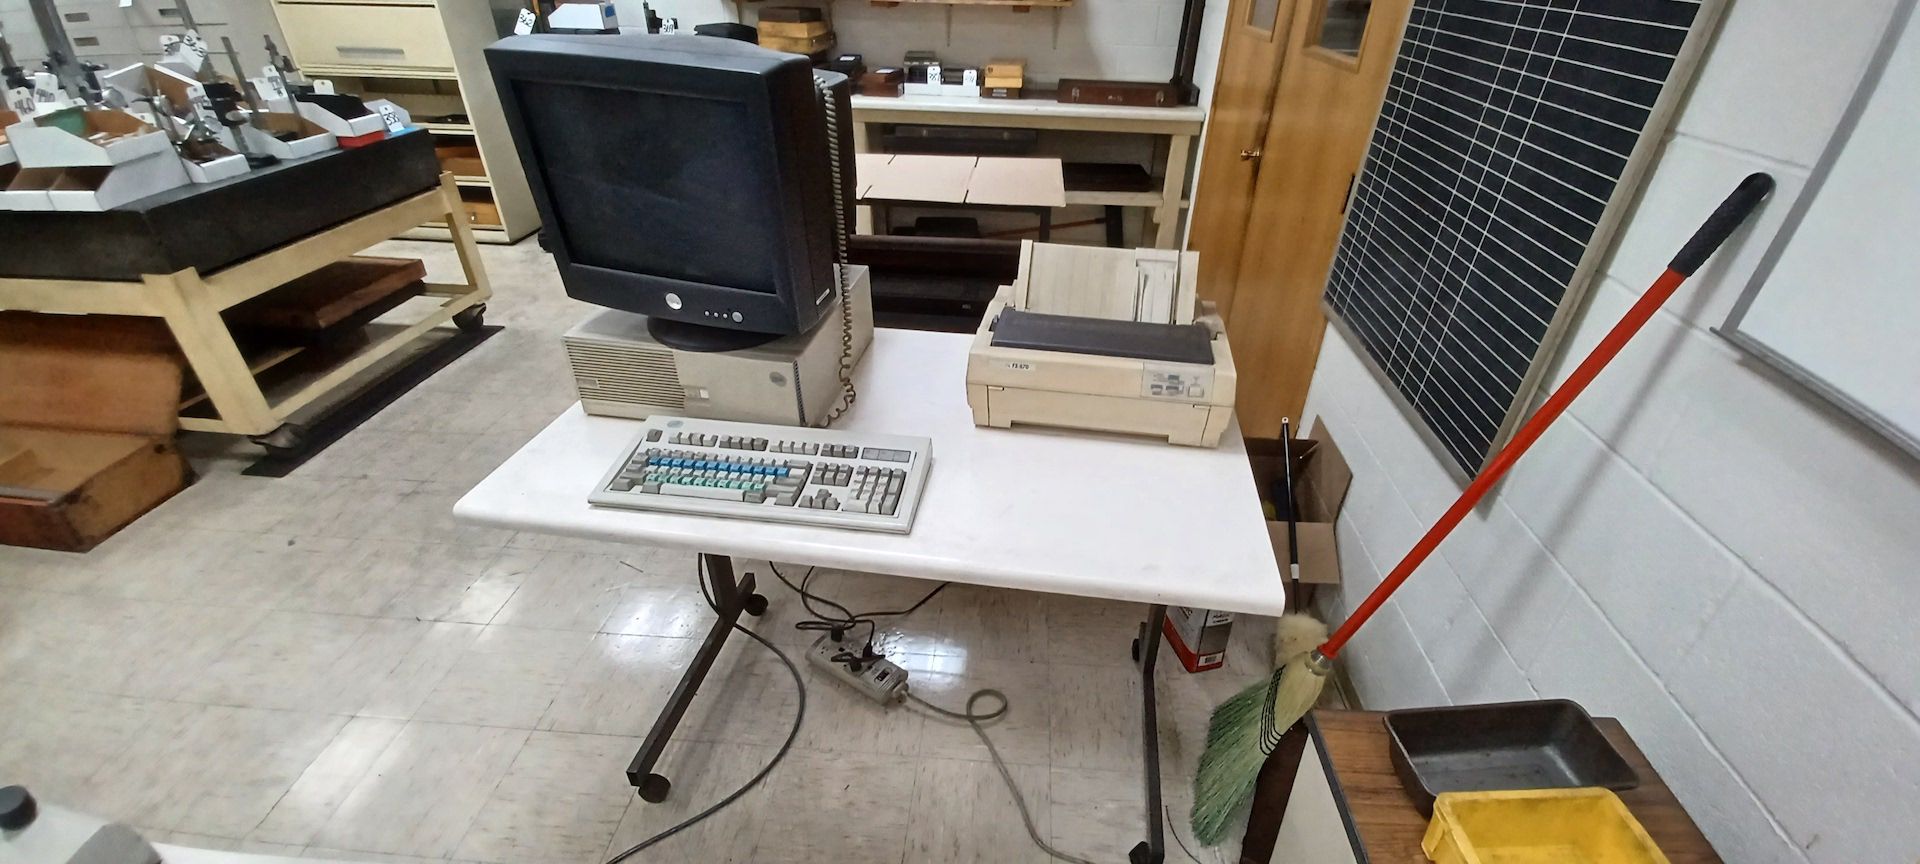 LOT: Mitutoyo Microcord Model BH715 Coordinate Measuring Machine, S/N 0314508002111112, 83 in. x - Image 4 of 8